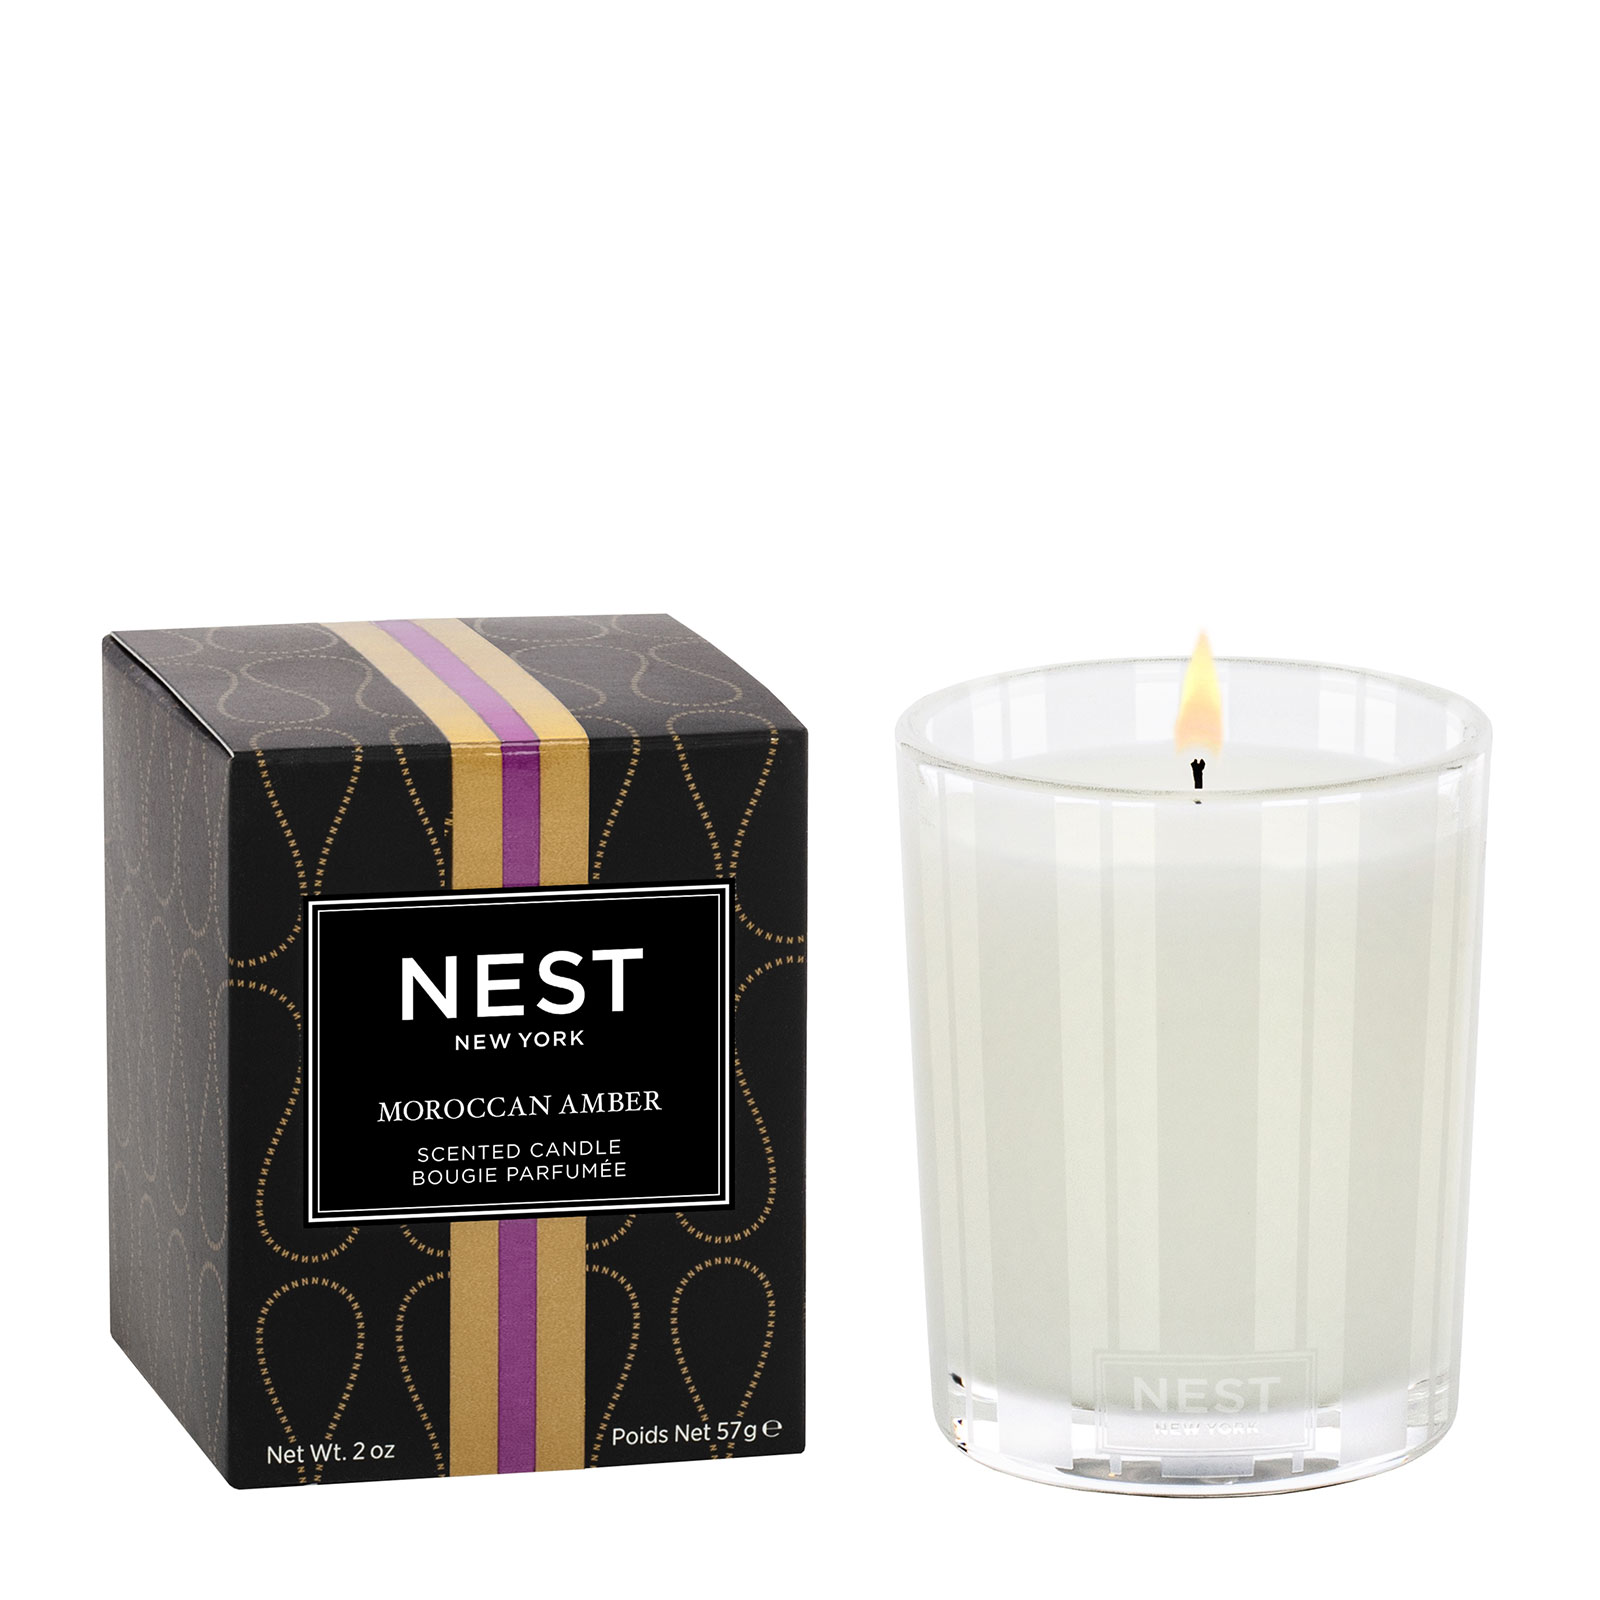 Nest New York Moroccan Amber Votive Candle 57G